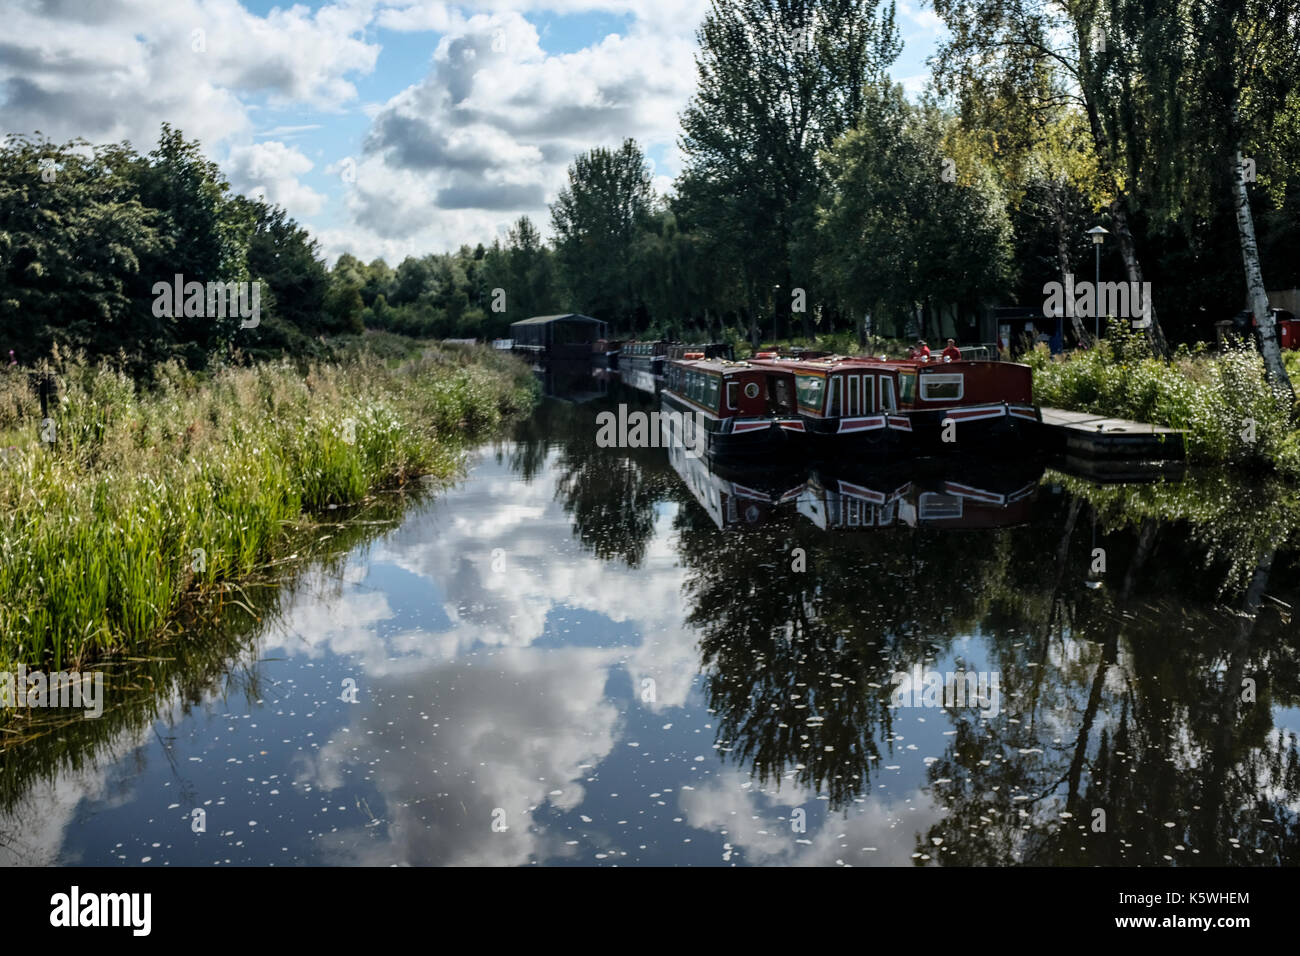 3 Scottish canal boats moored at the jetty near the Falkirk Wheel Visitor's Centre in Scotland Stock Photo